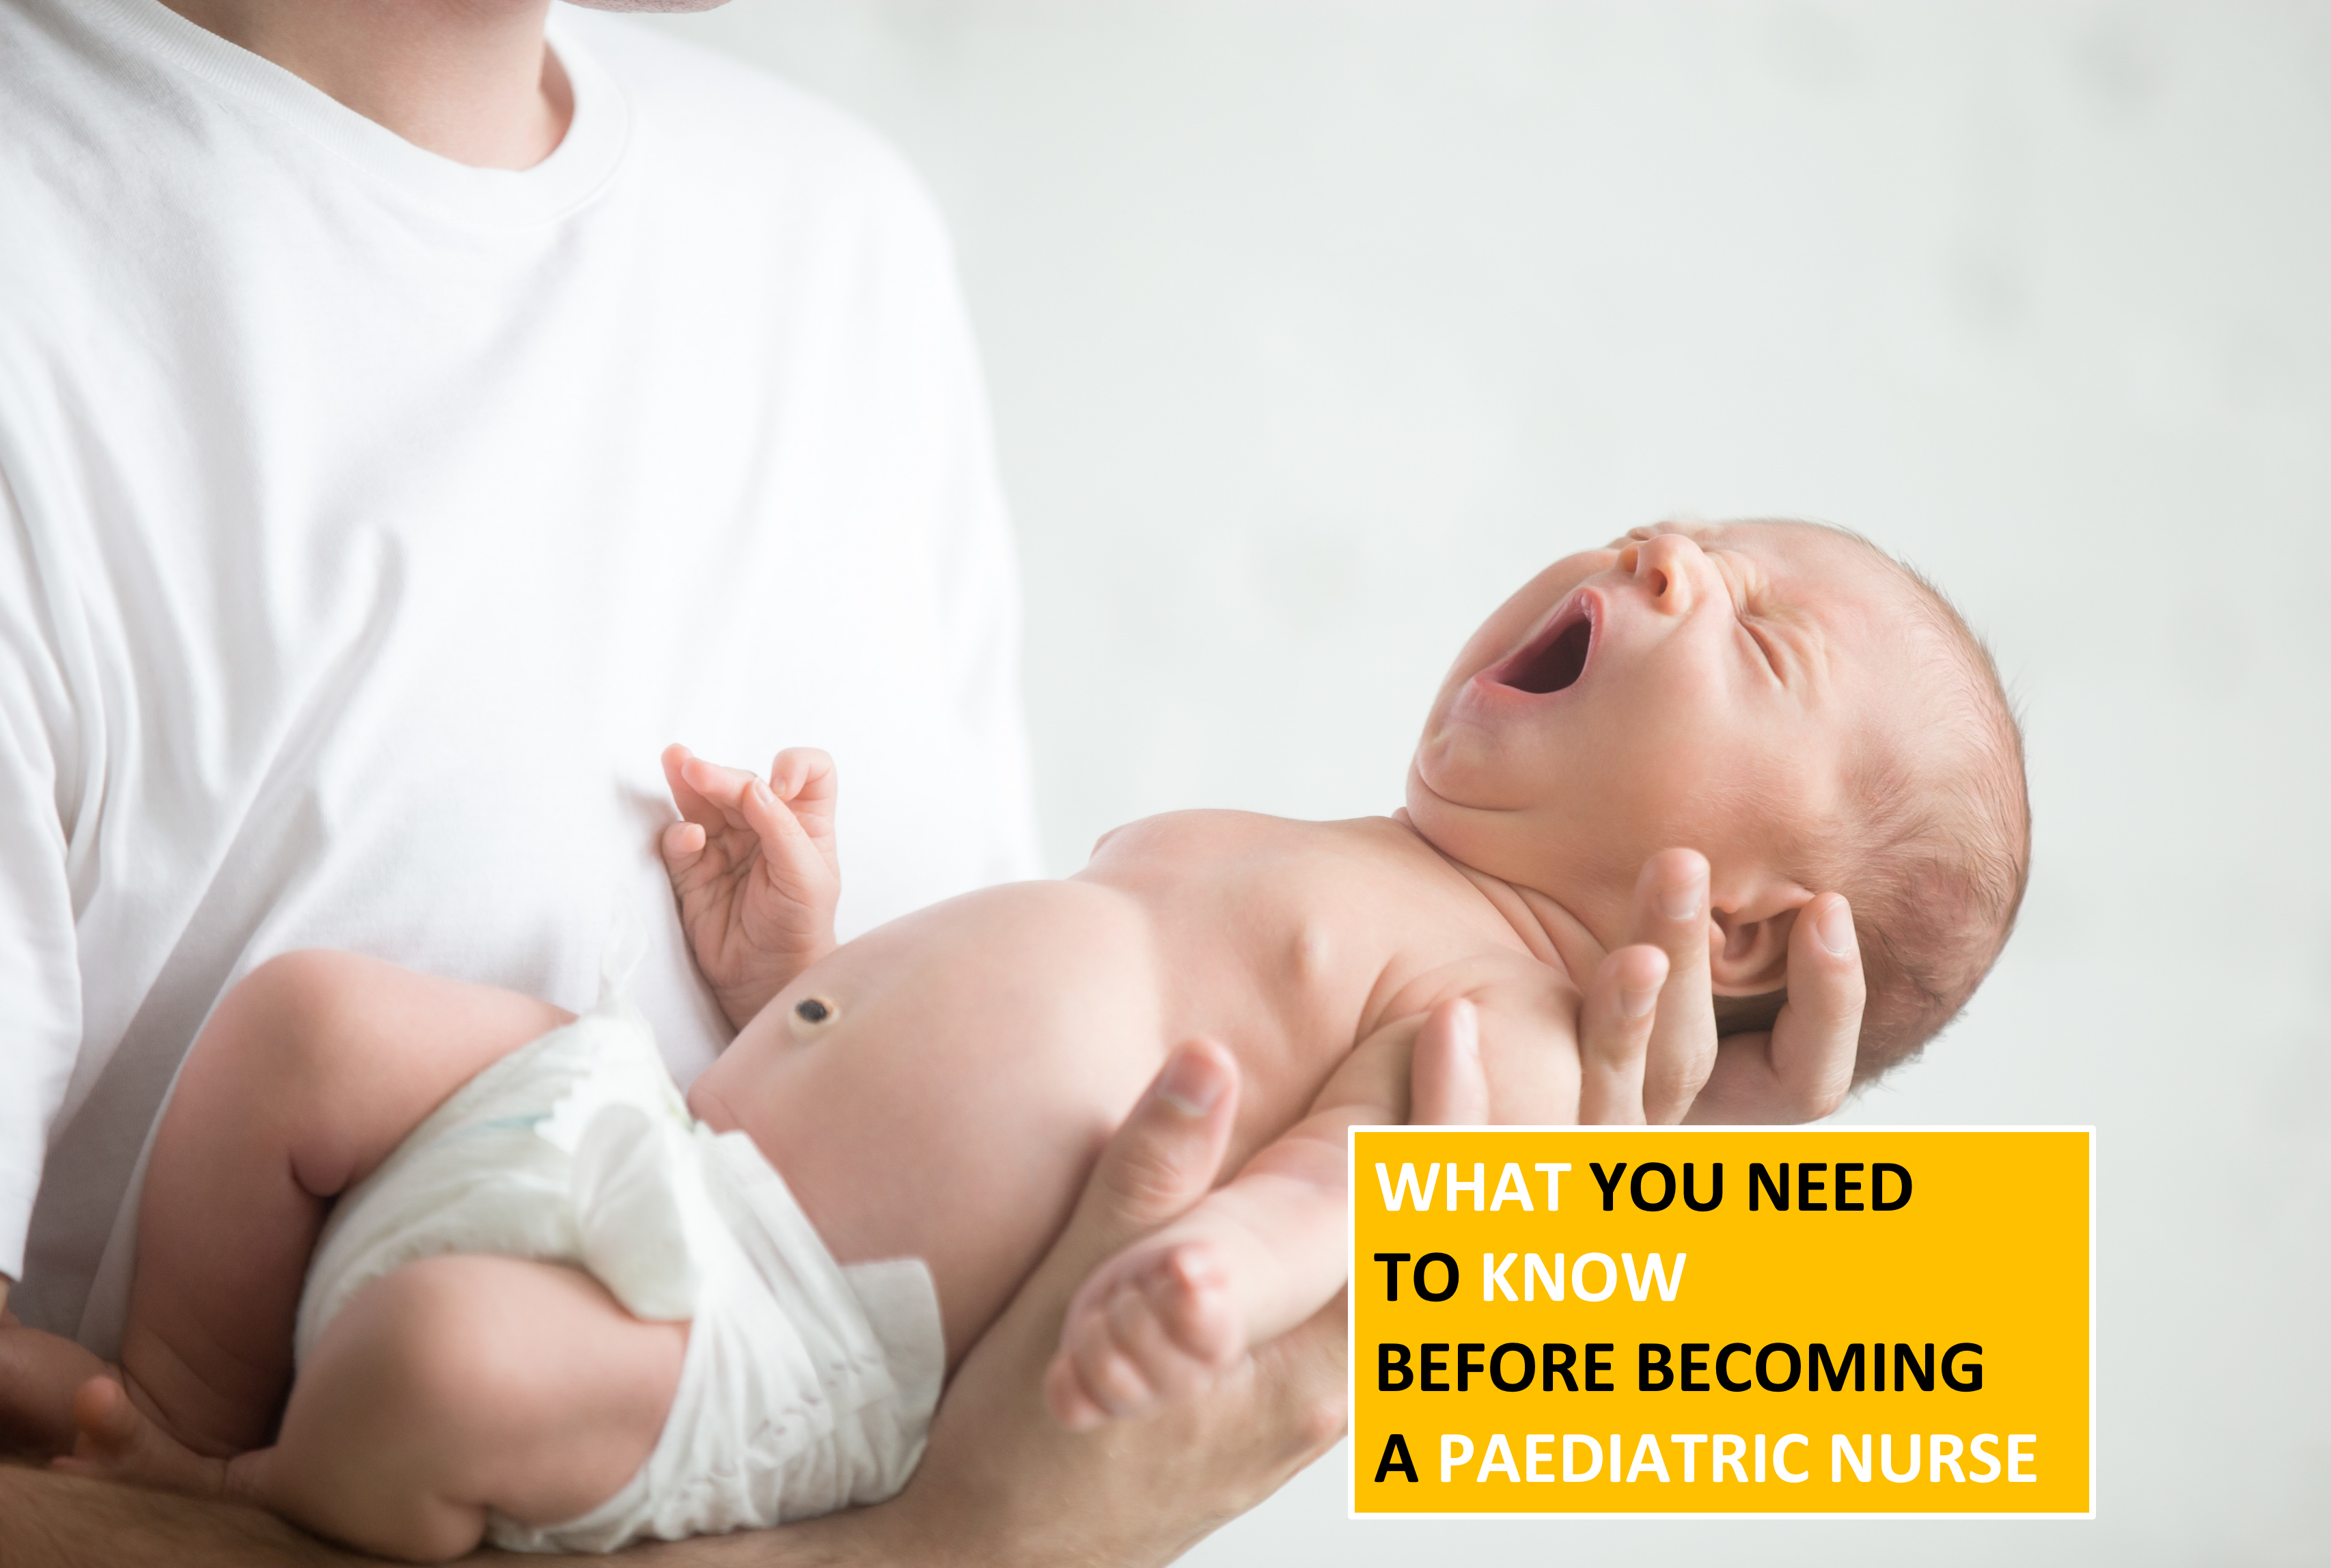 What You Need to Know Before Becoming a Paediatric Nurse